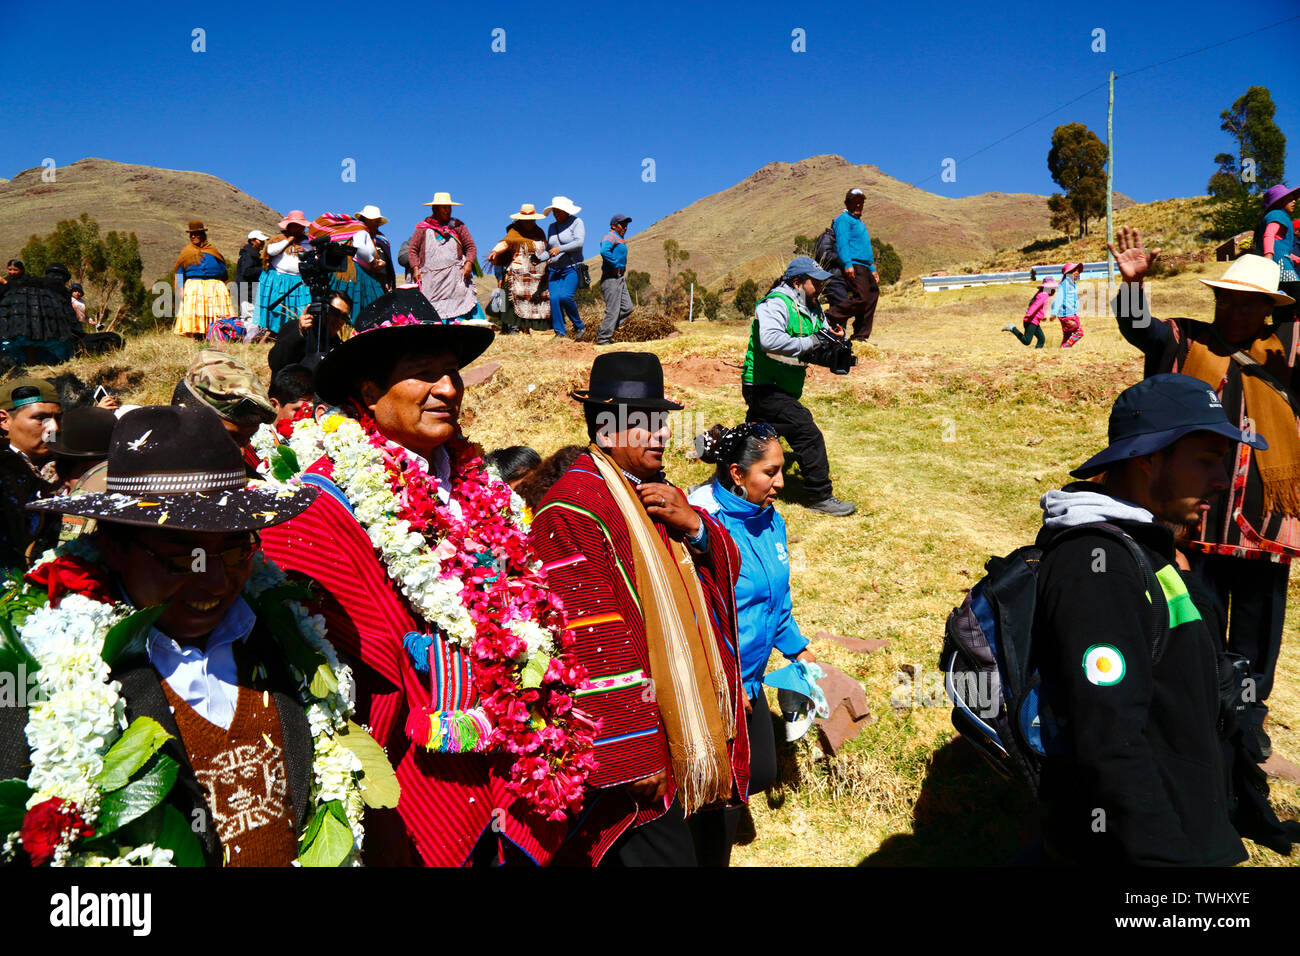 Bolivia 20th June 2019: Bolivian president Evo Morales Ayma (centre) leads an International Hike along a section of the Qhapaq Ñan Inca road near Desaguadero. The event was organised by the Ministry of Cultures & Tourism to promote tourism and Bolivia's indigenous cultures. Stock Photo